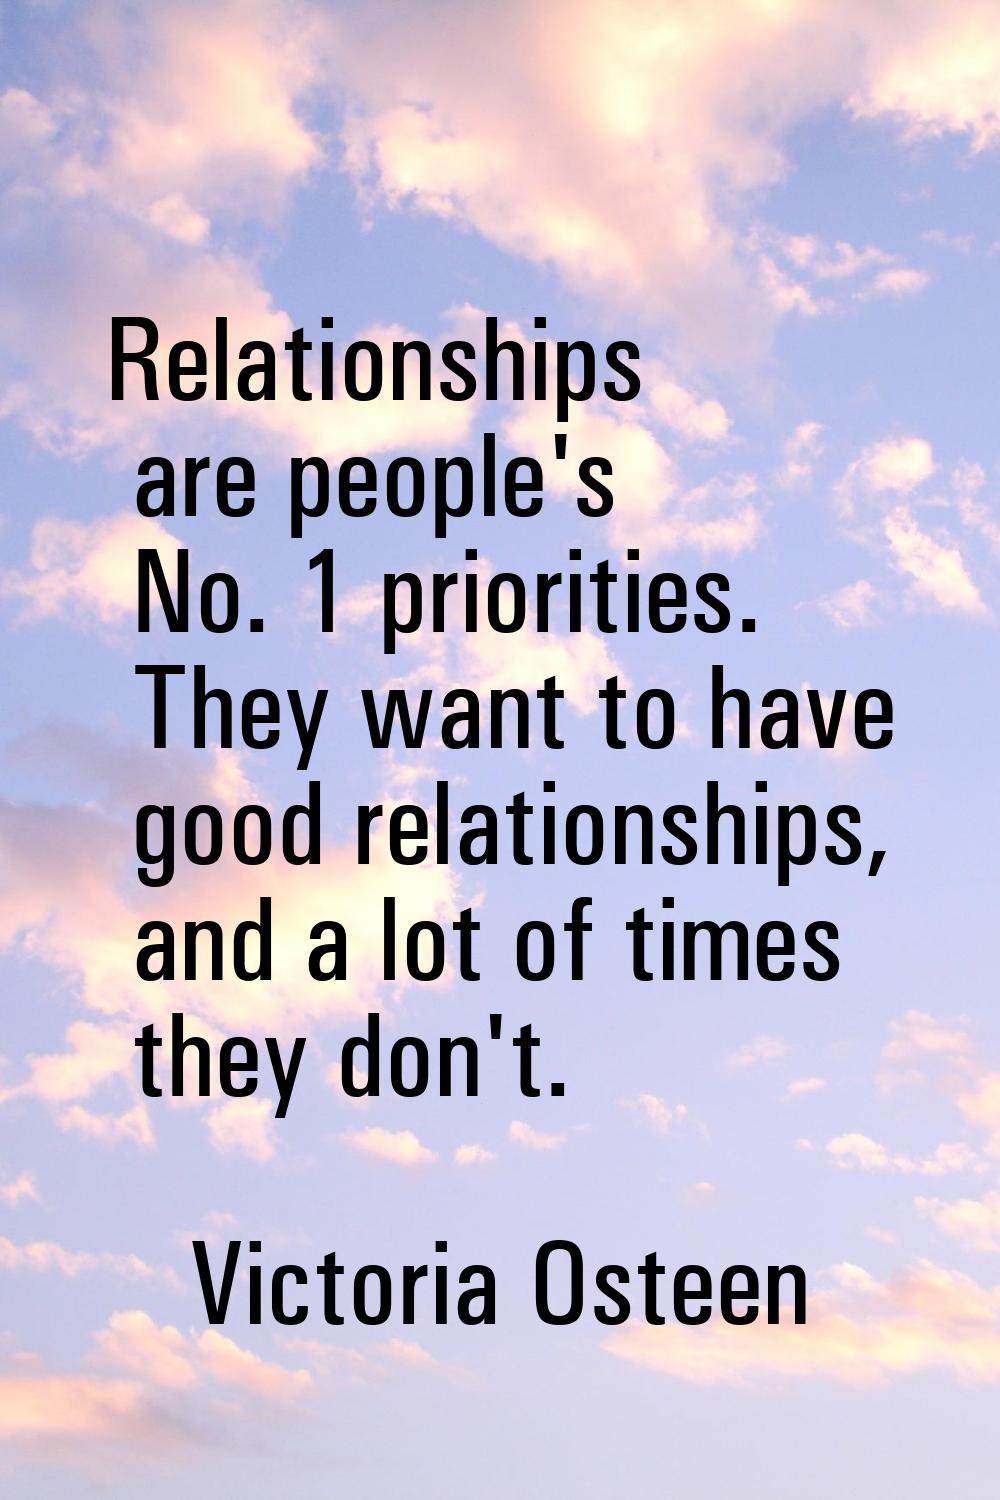 Relationships are people's No. 1 priorities. They want to have good relationships, and a lot of tim